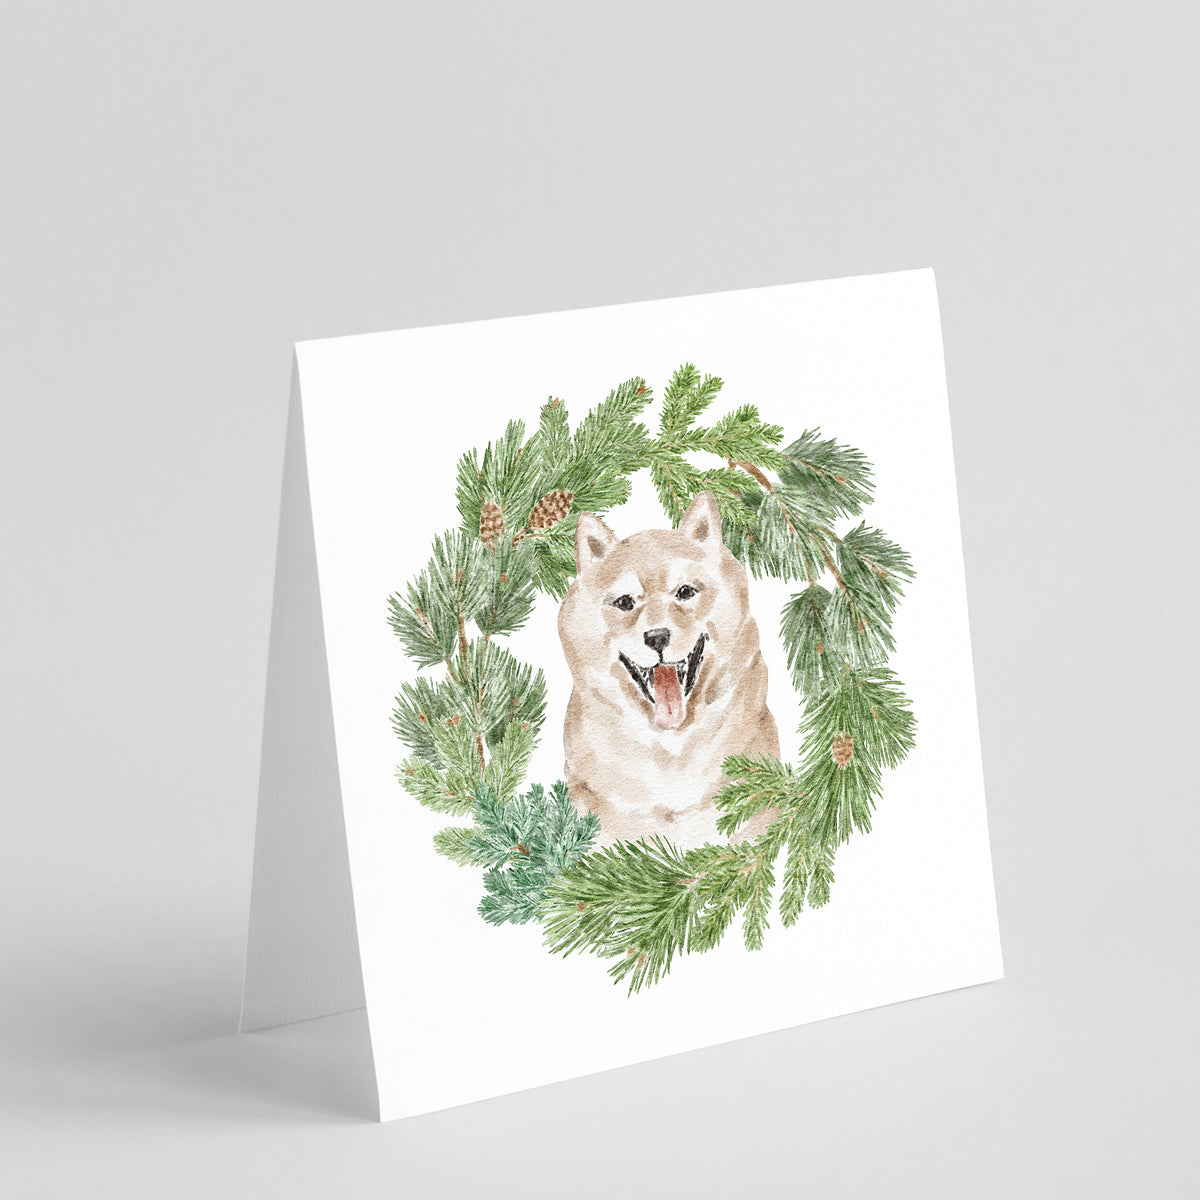 Buy this Shiba Inu Cream with Christmas Wreath Square Greeting Cards and Envelopes Pack of 8